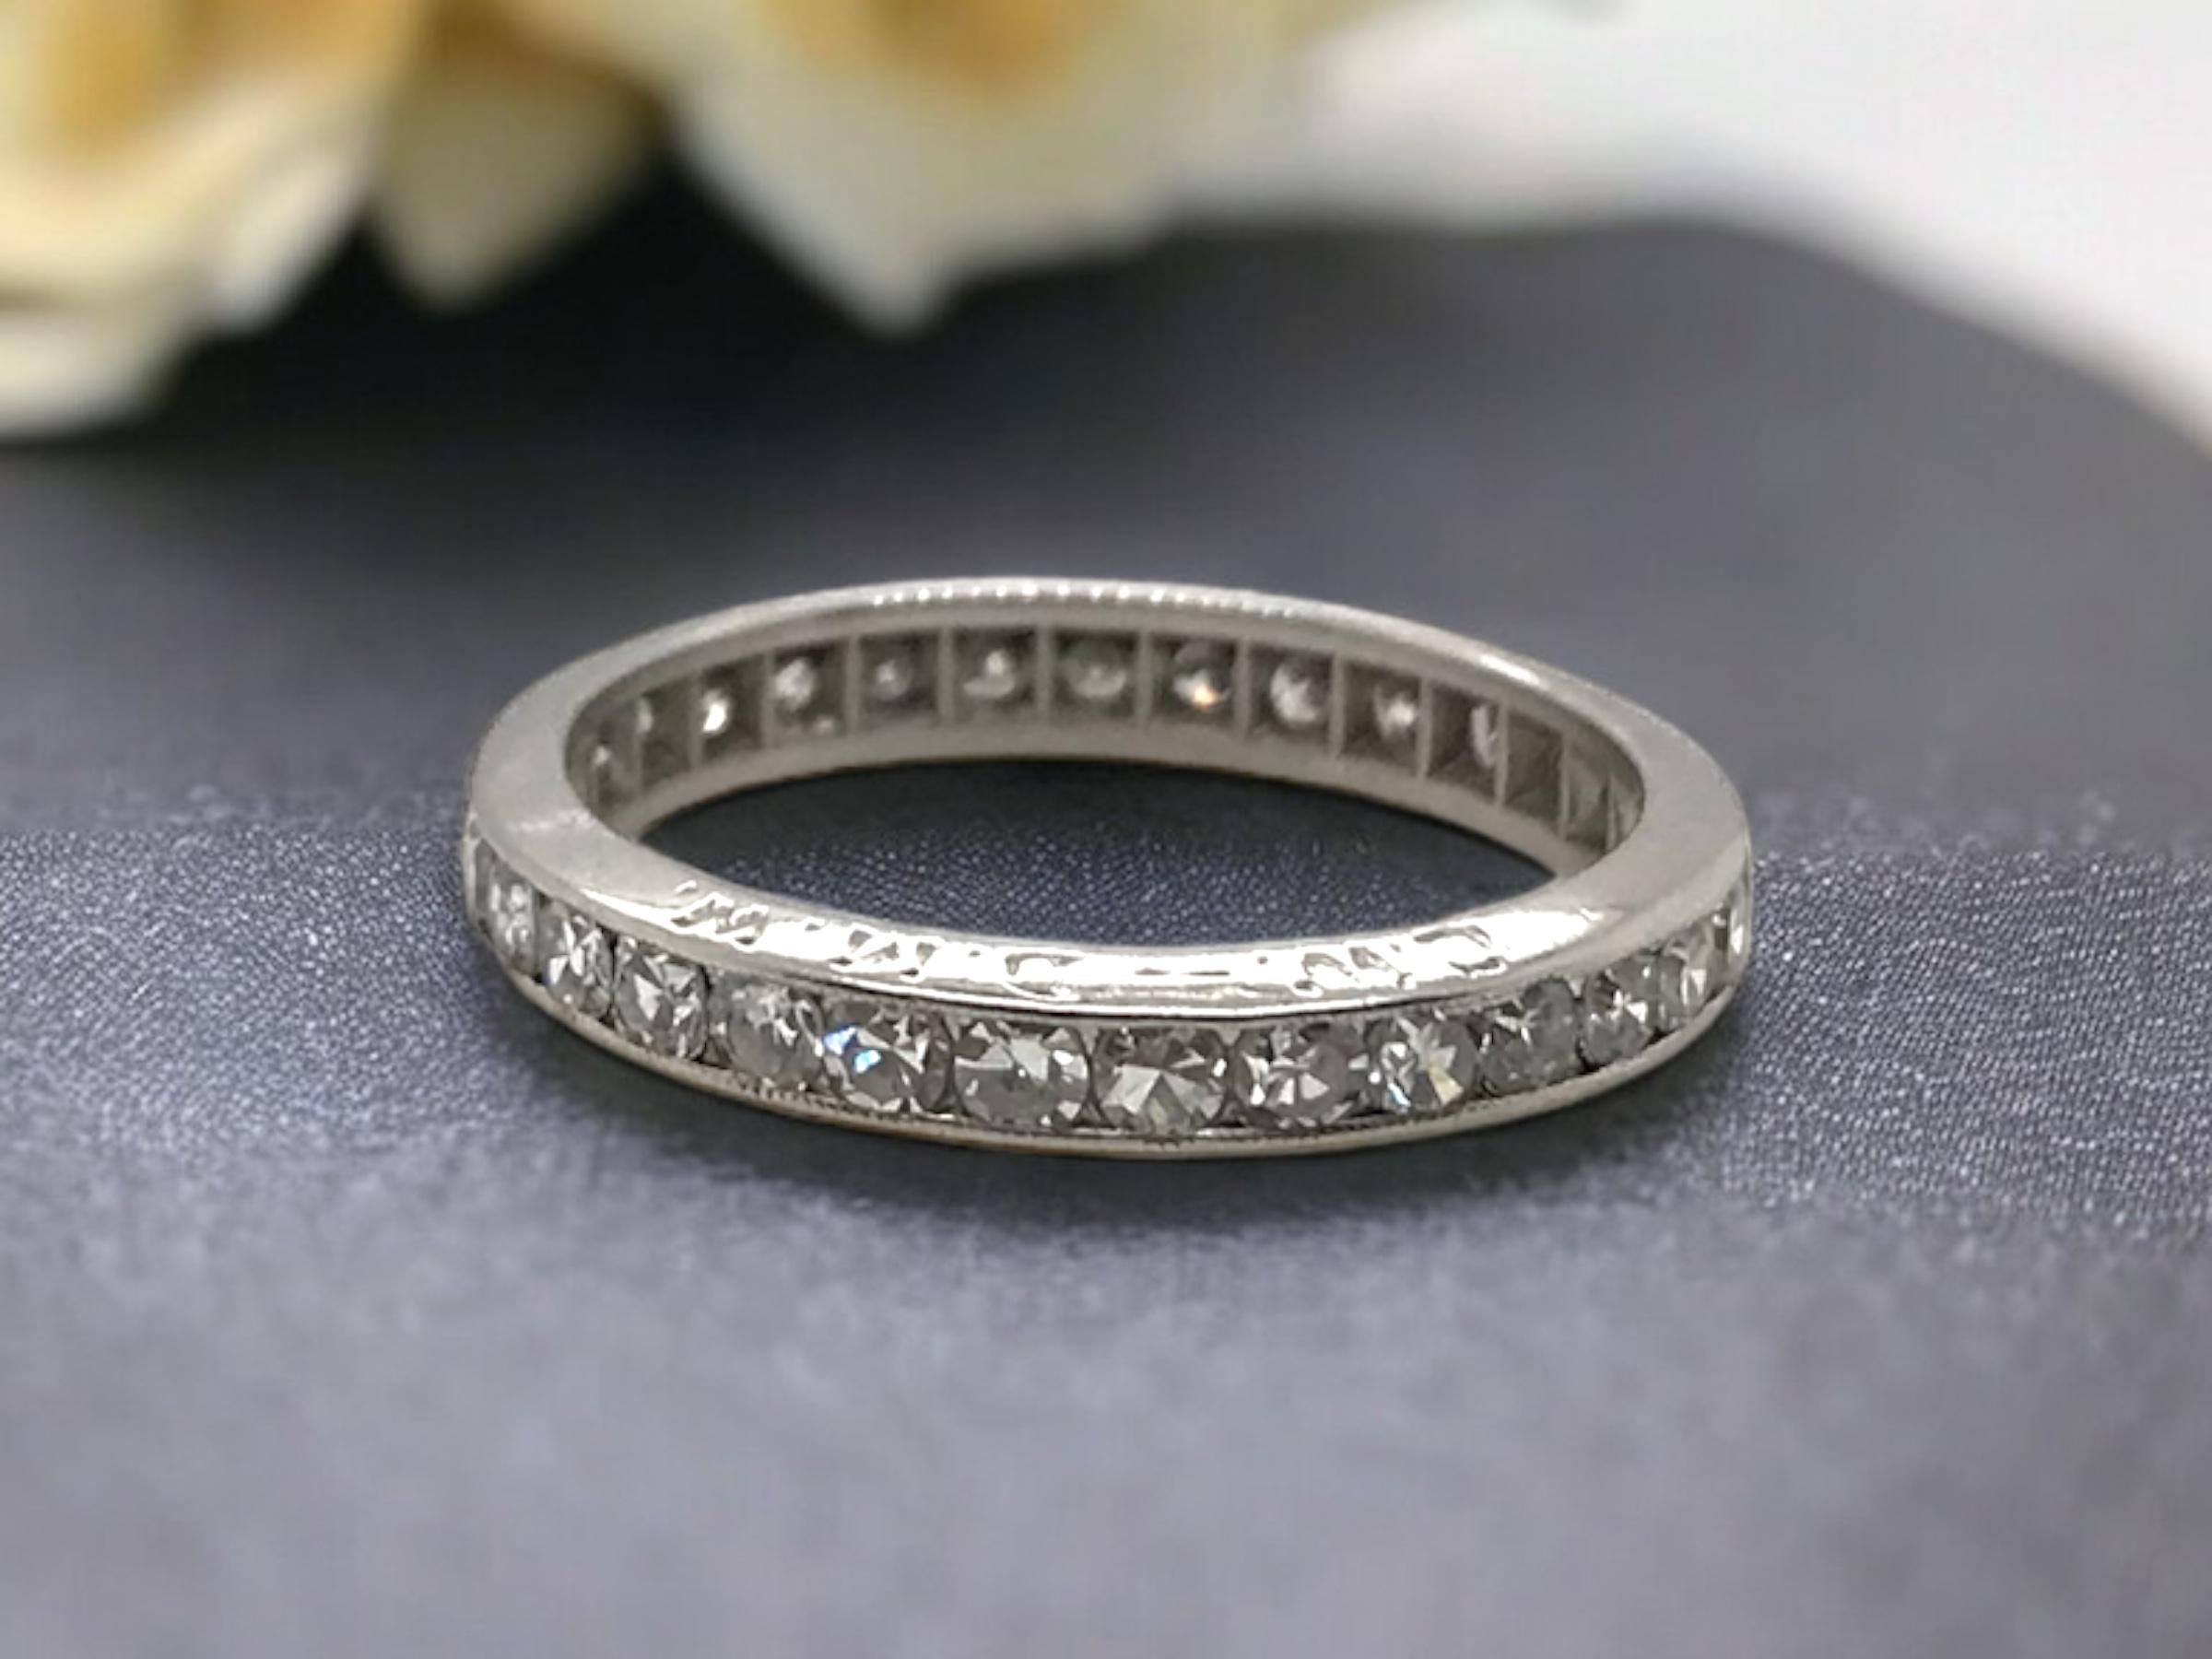 Such a classic piece!
This band is sure to go with any stack.

Ring Details
Material: Platinum
Era: Art Deco 1910 - 1930
Engraved: C.W. - D.M.W.
Weight: 2.7 Grams
Width: 2.8mm
Height: 1.5mm
Finger Size 5 1/2
Unfortunately Eternity Bands Are Not